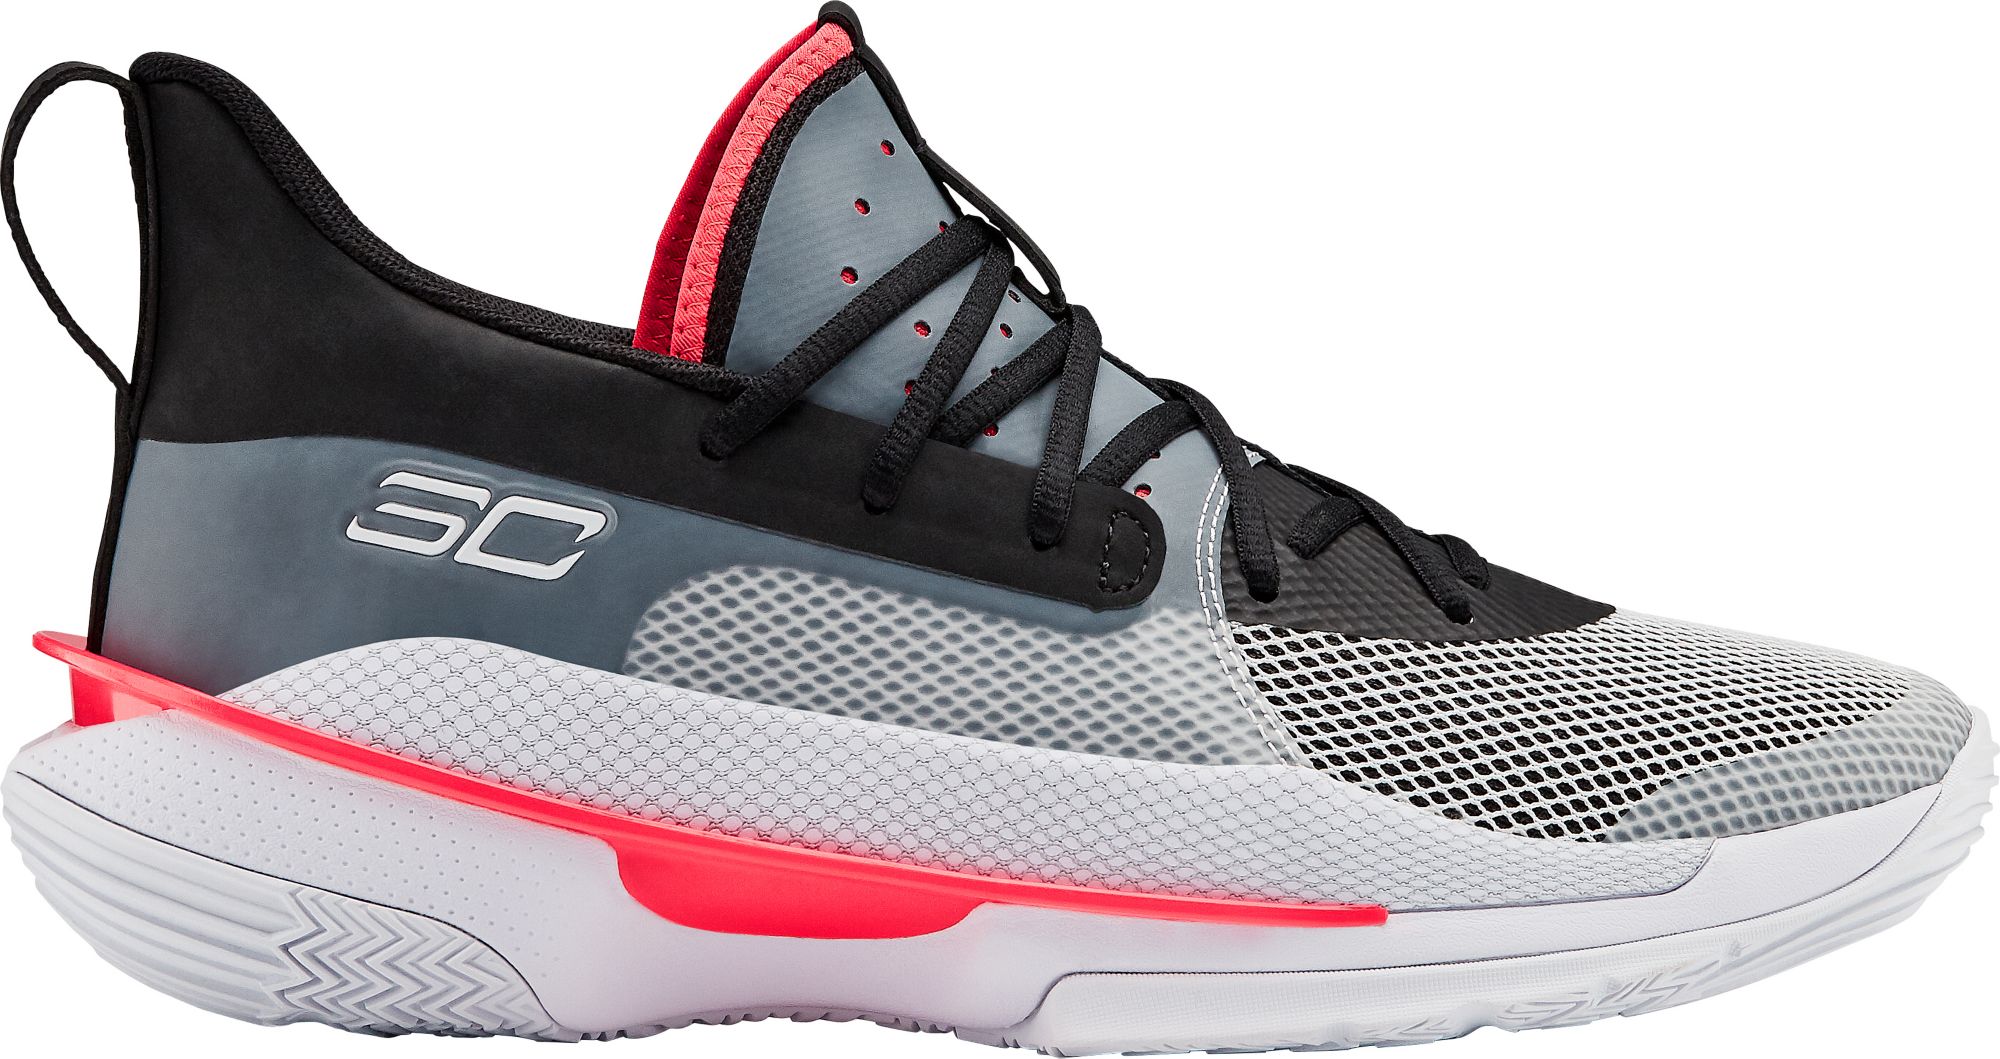 women's stephen curry basketball shoes